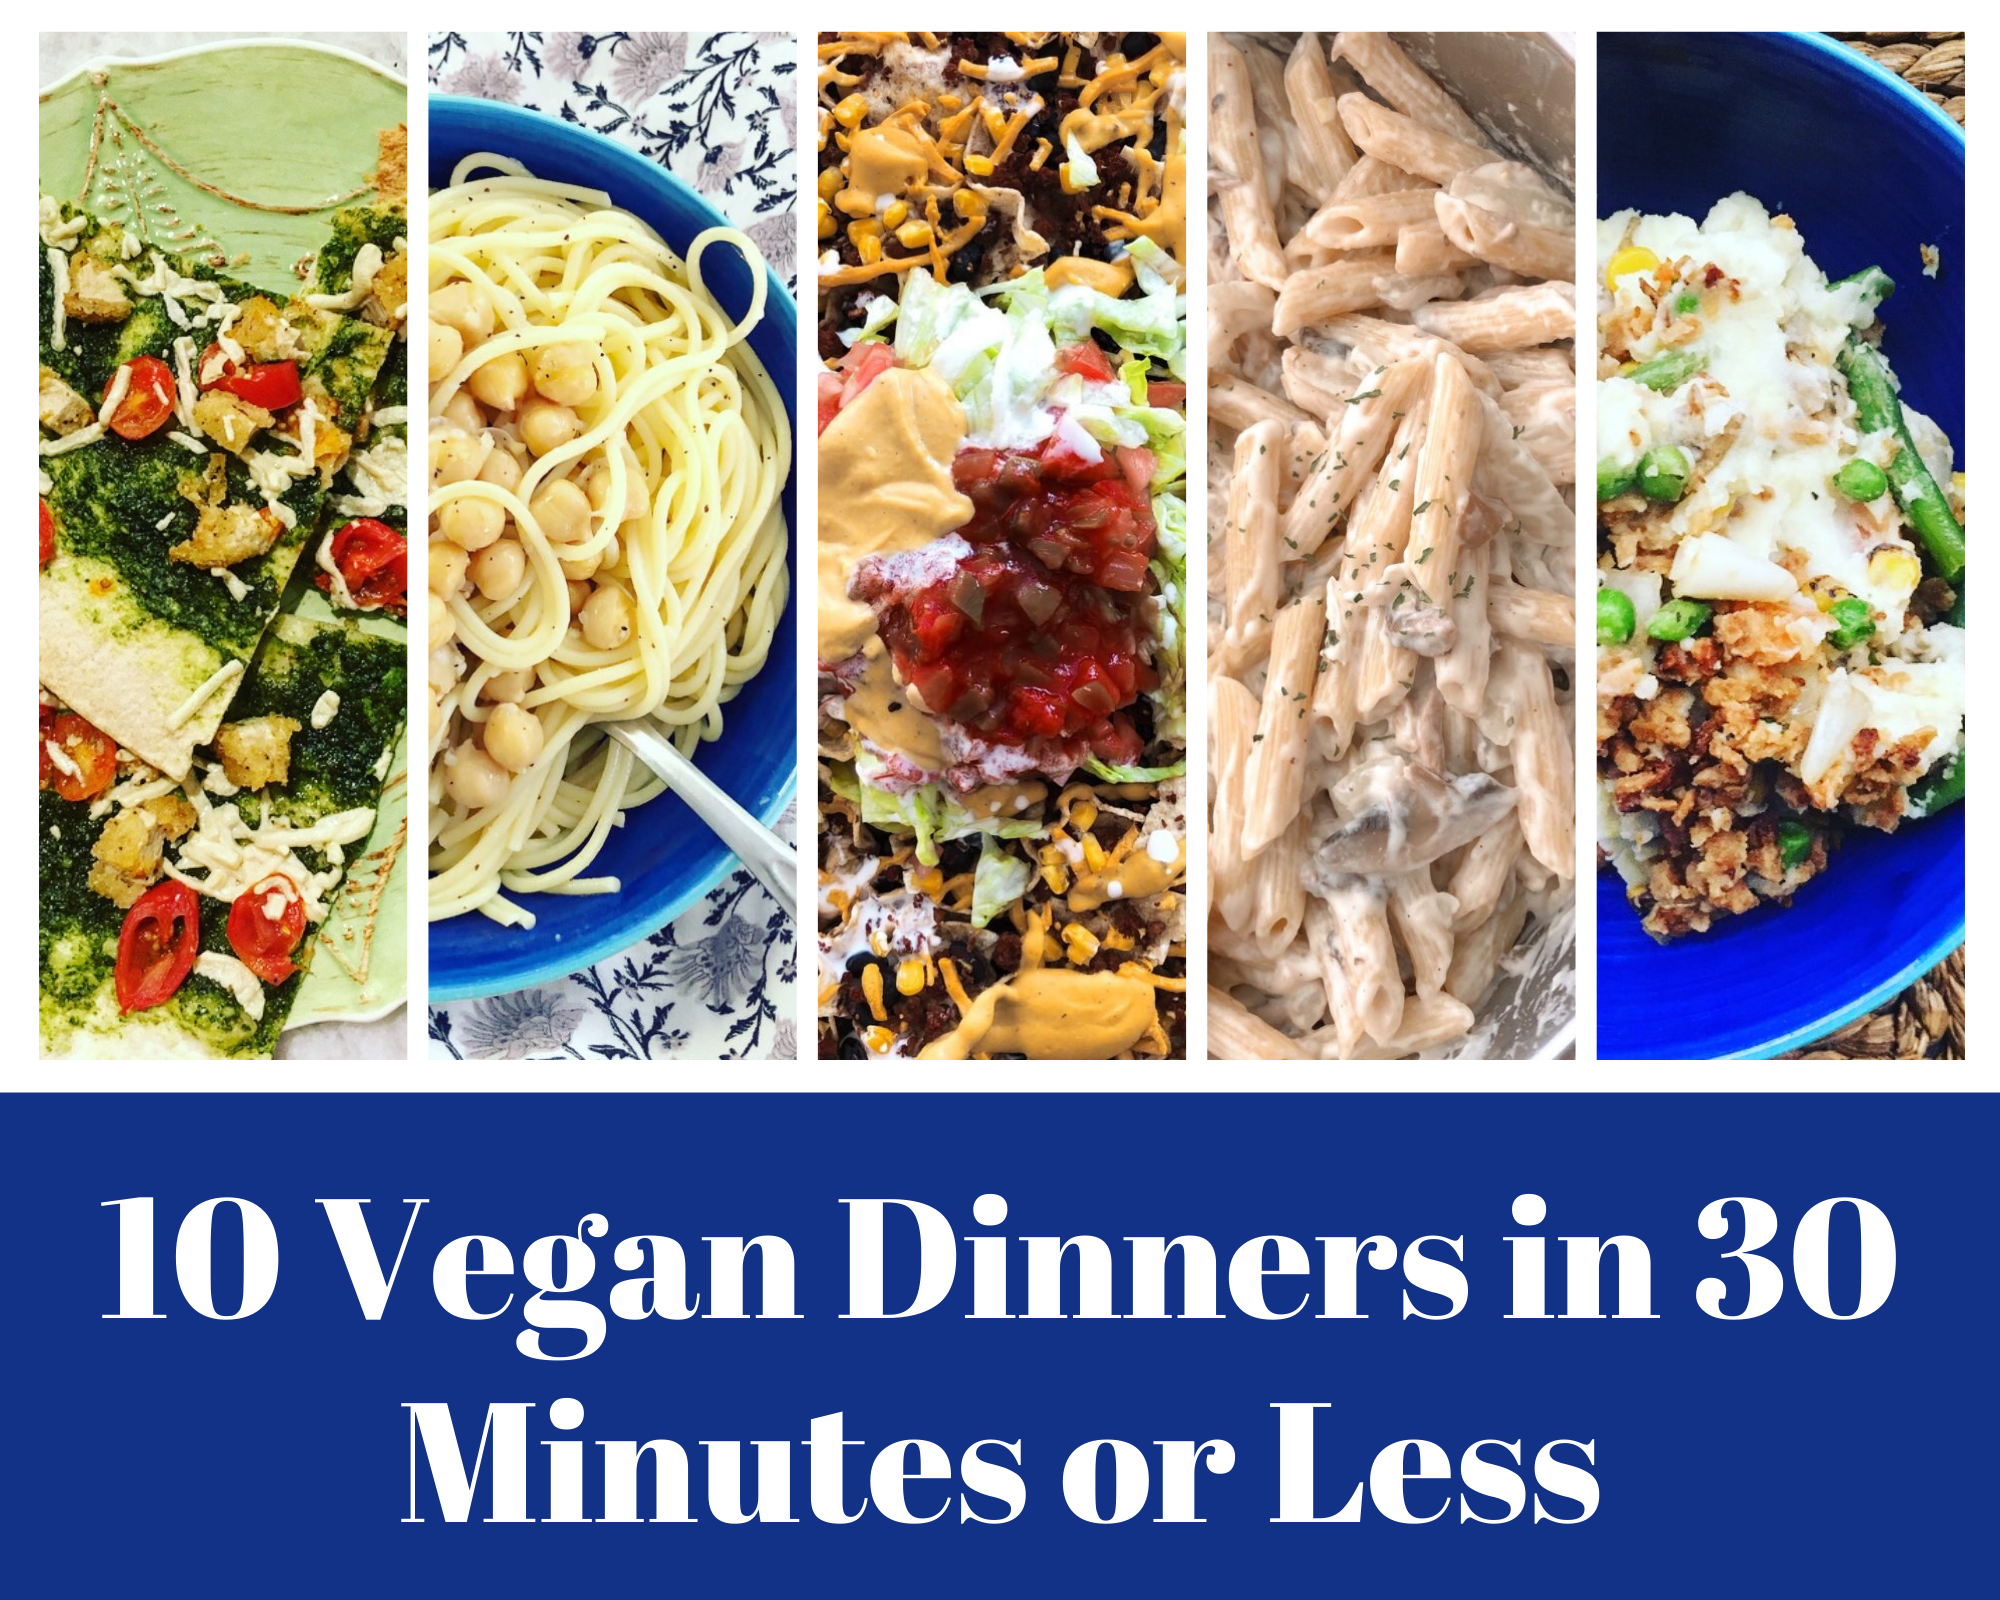 10 Vegan Dinners in 30 Minutes or Less